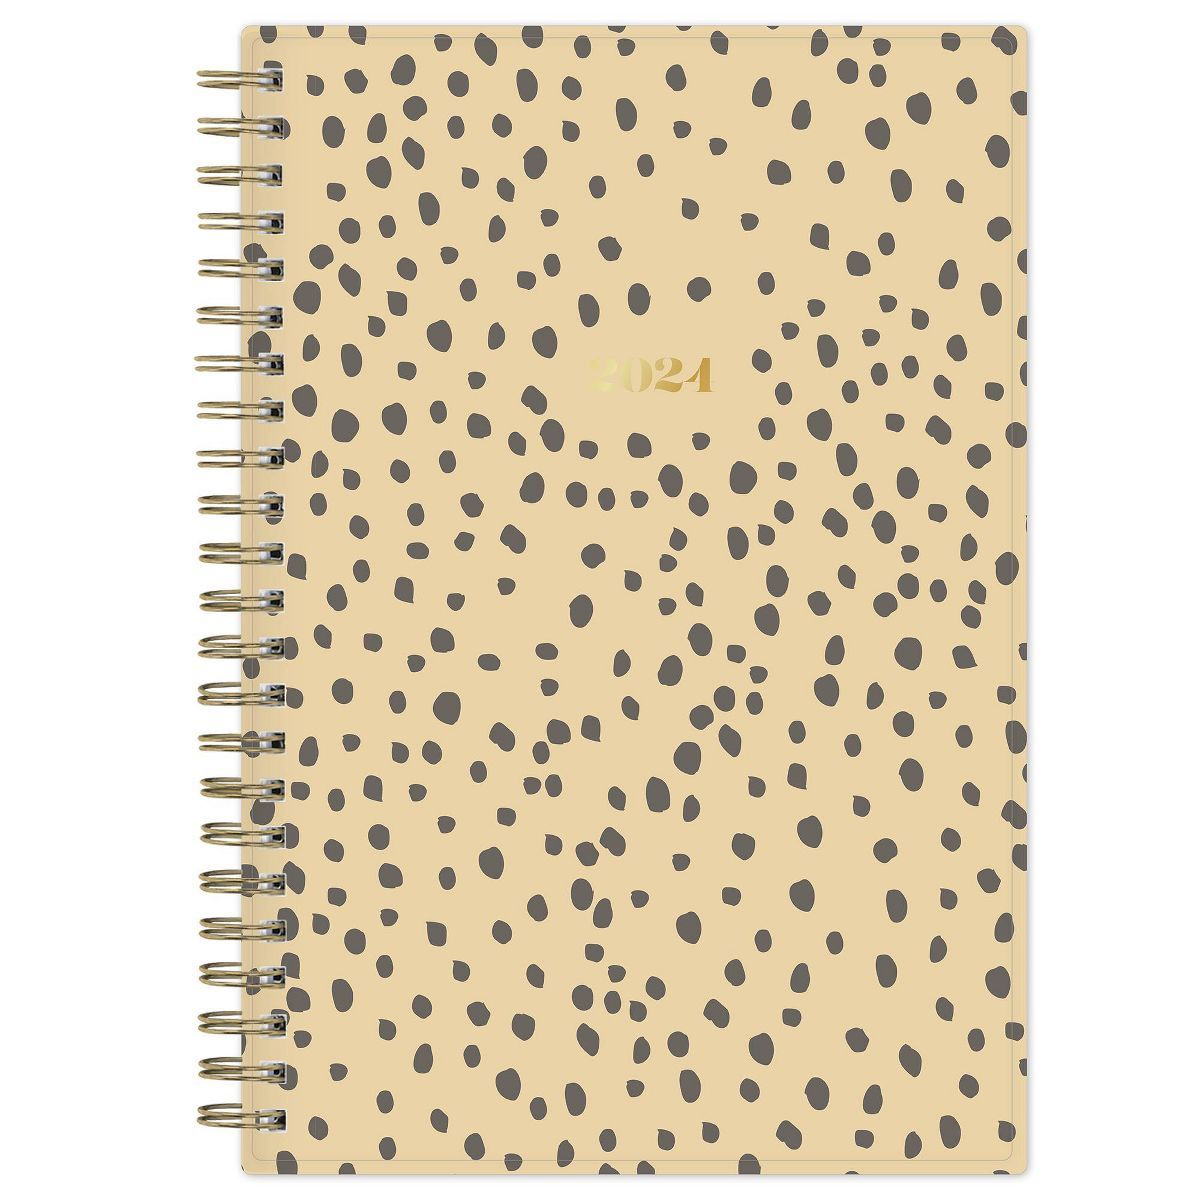 The Everygirl x Day Designer 2024 Planner 5"x8" Weekly/Monthly Senegal Tan | Target